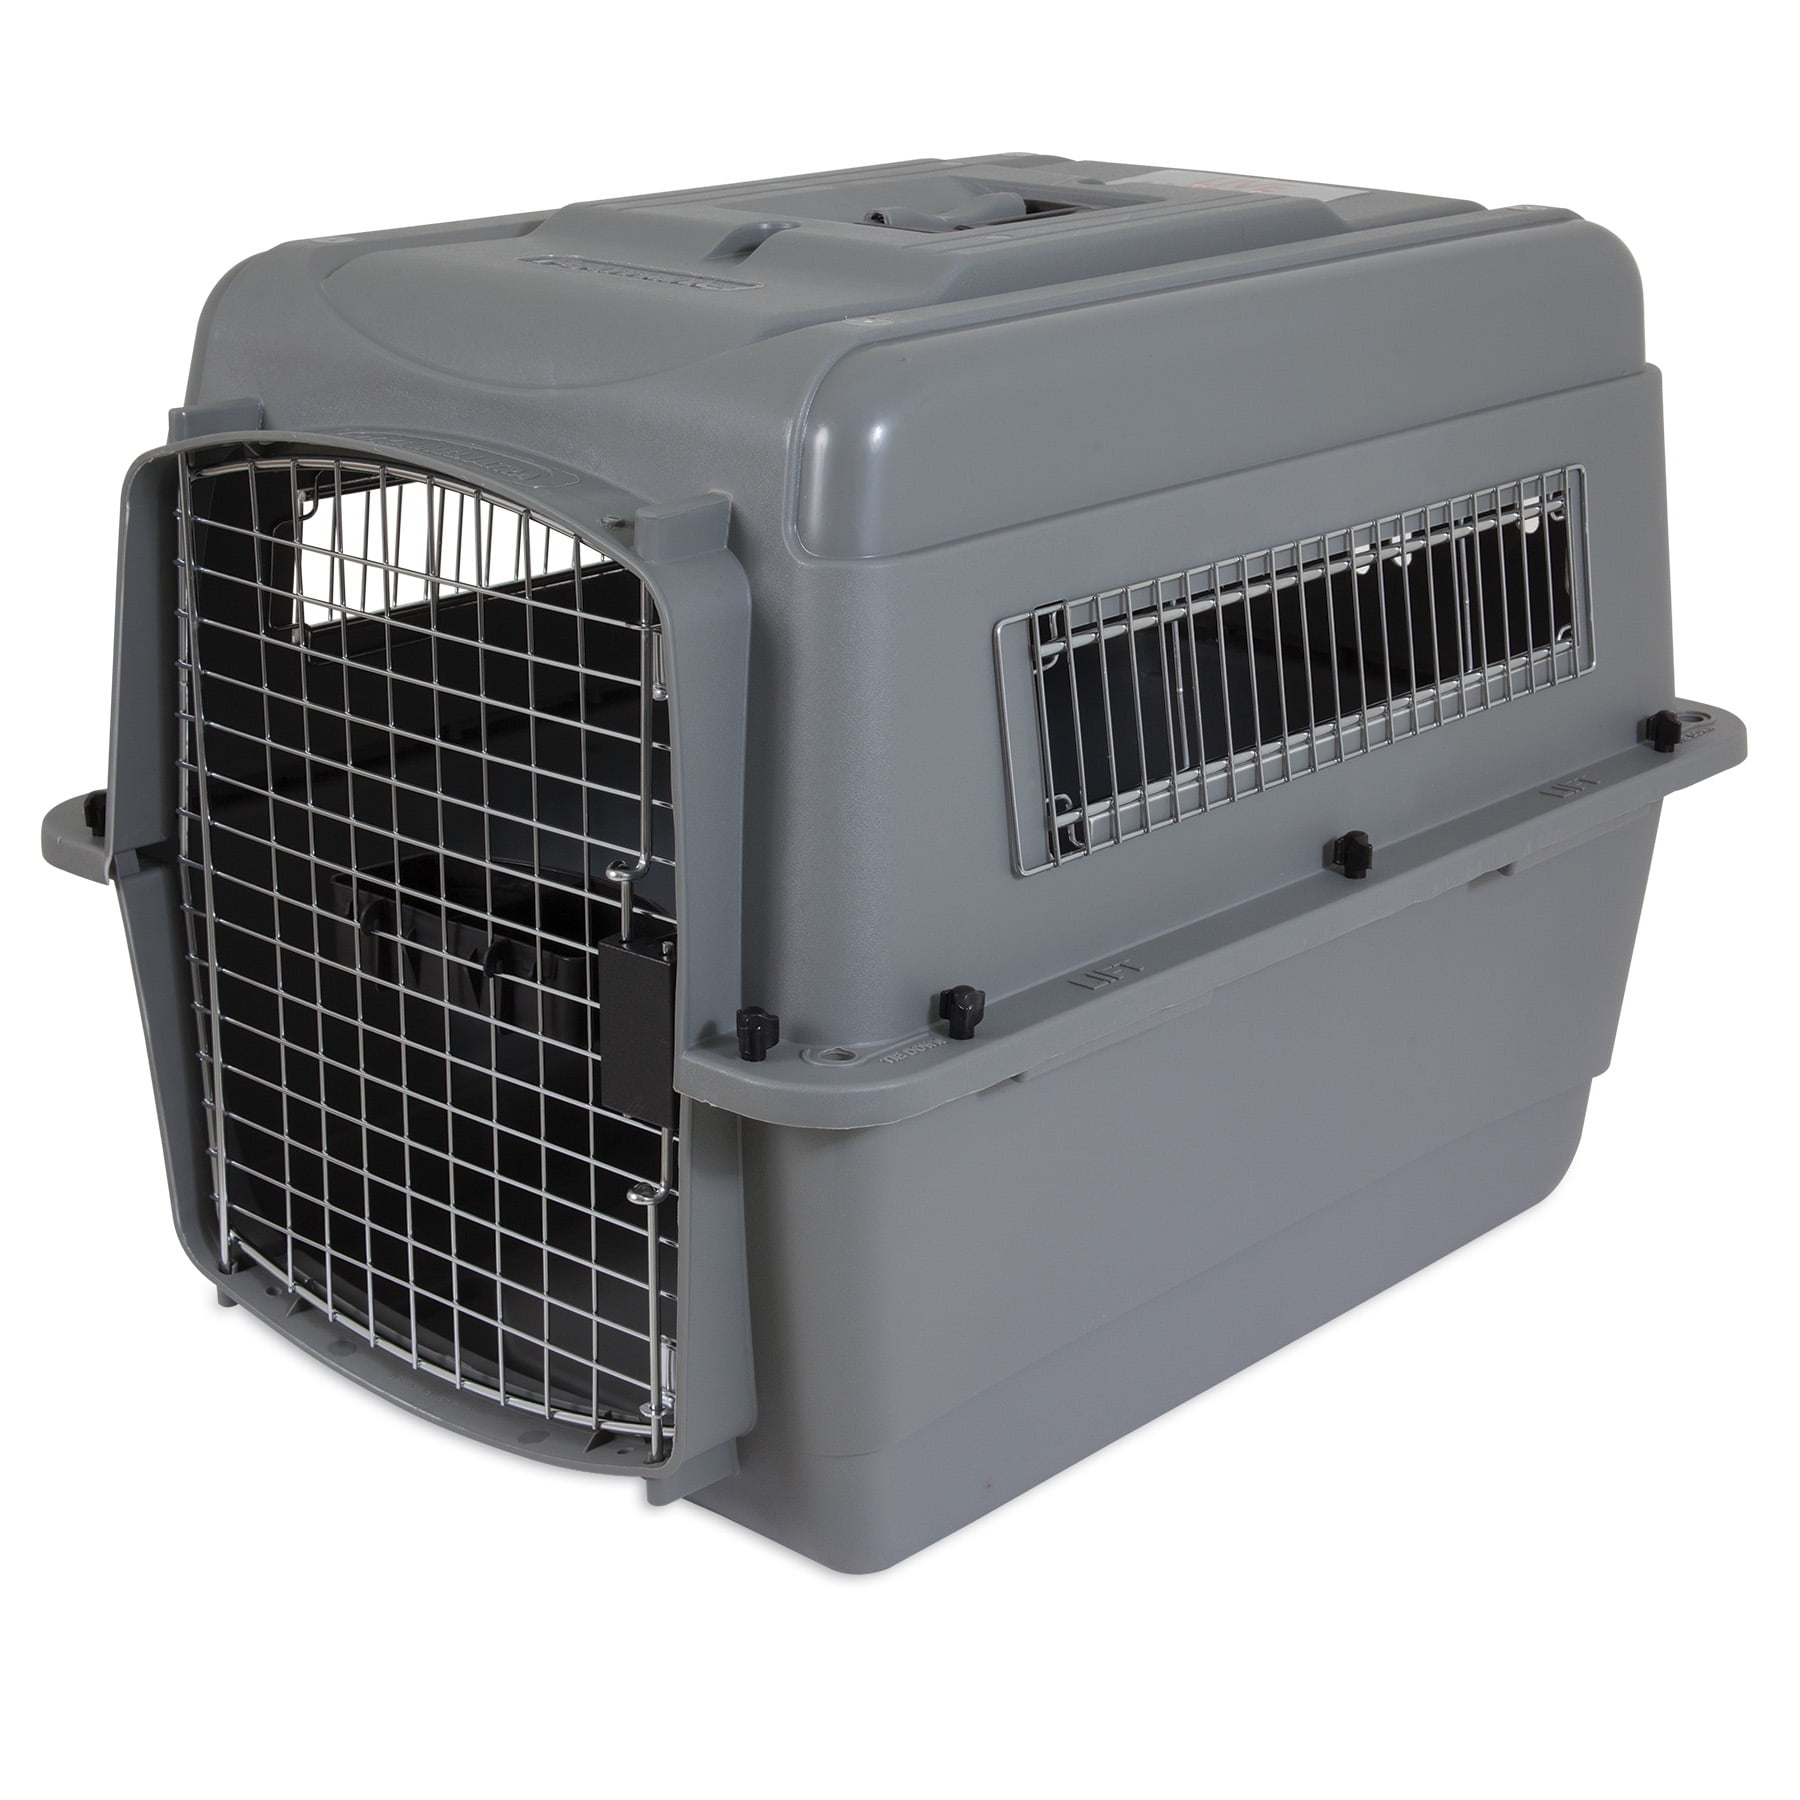 Petmate Sky Kennel, Medium, for Dogs, 28 inch L x 20.5 inch W x